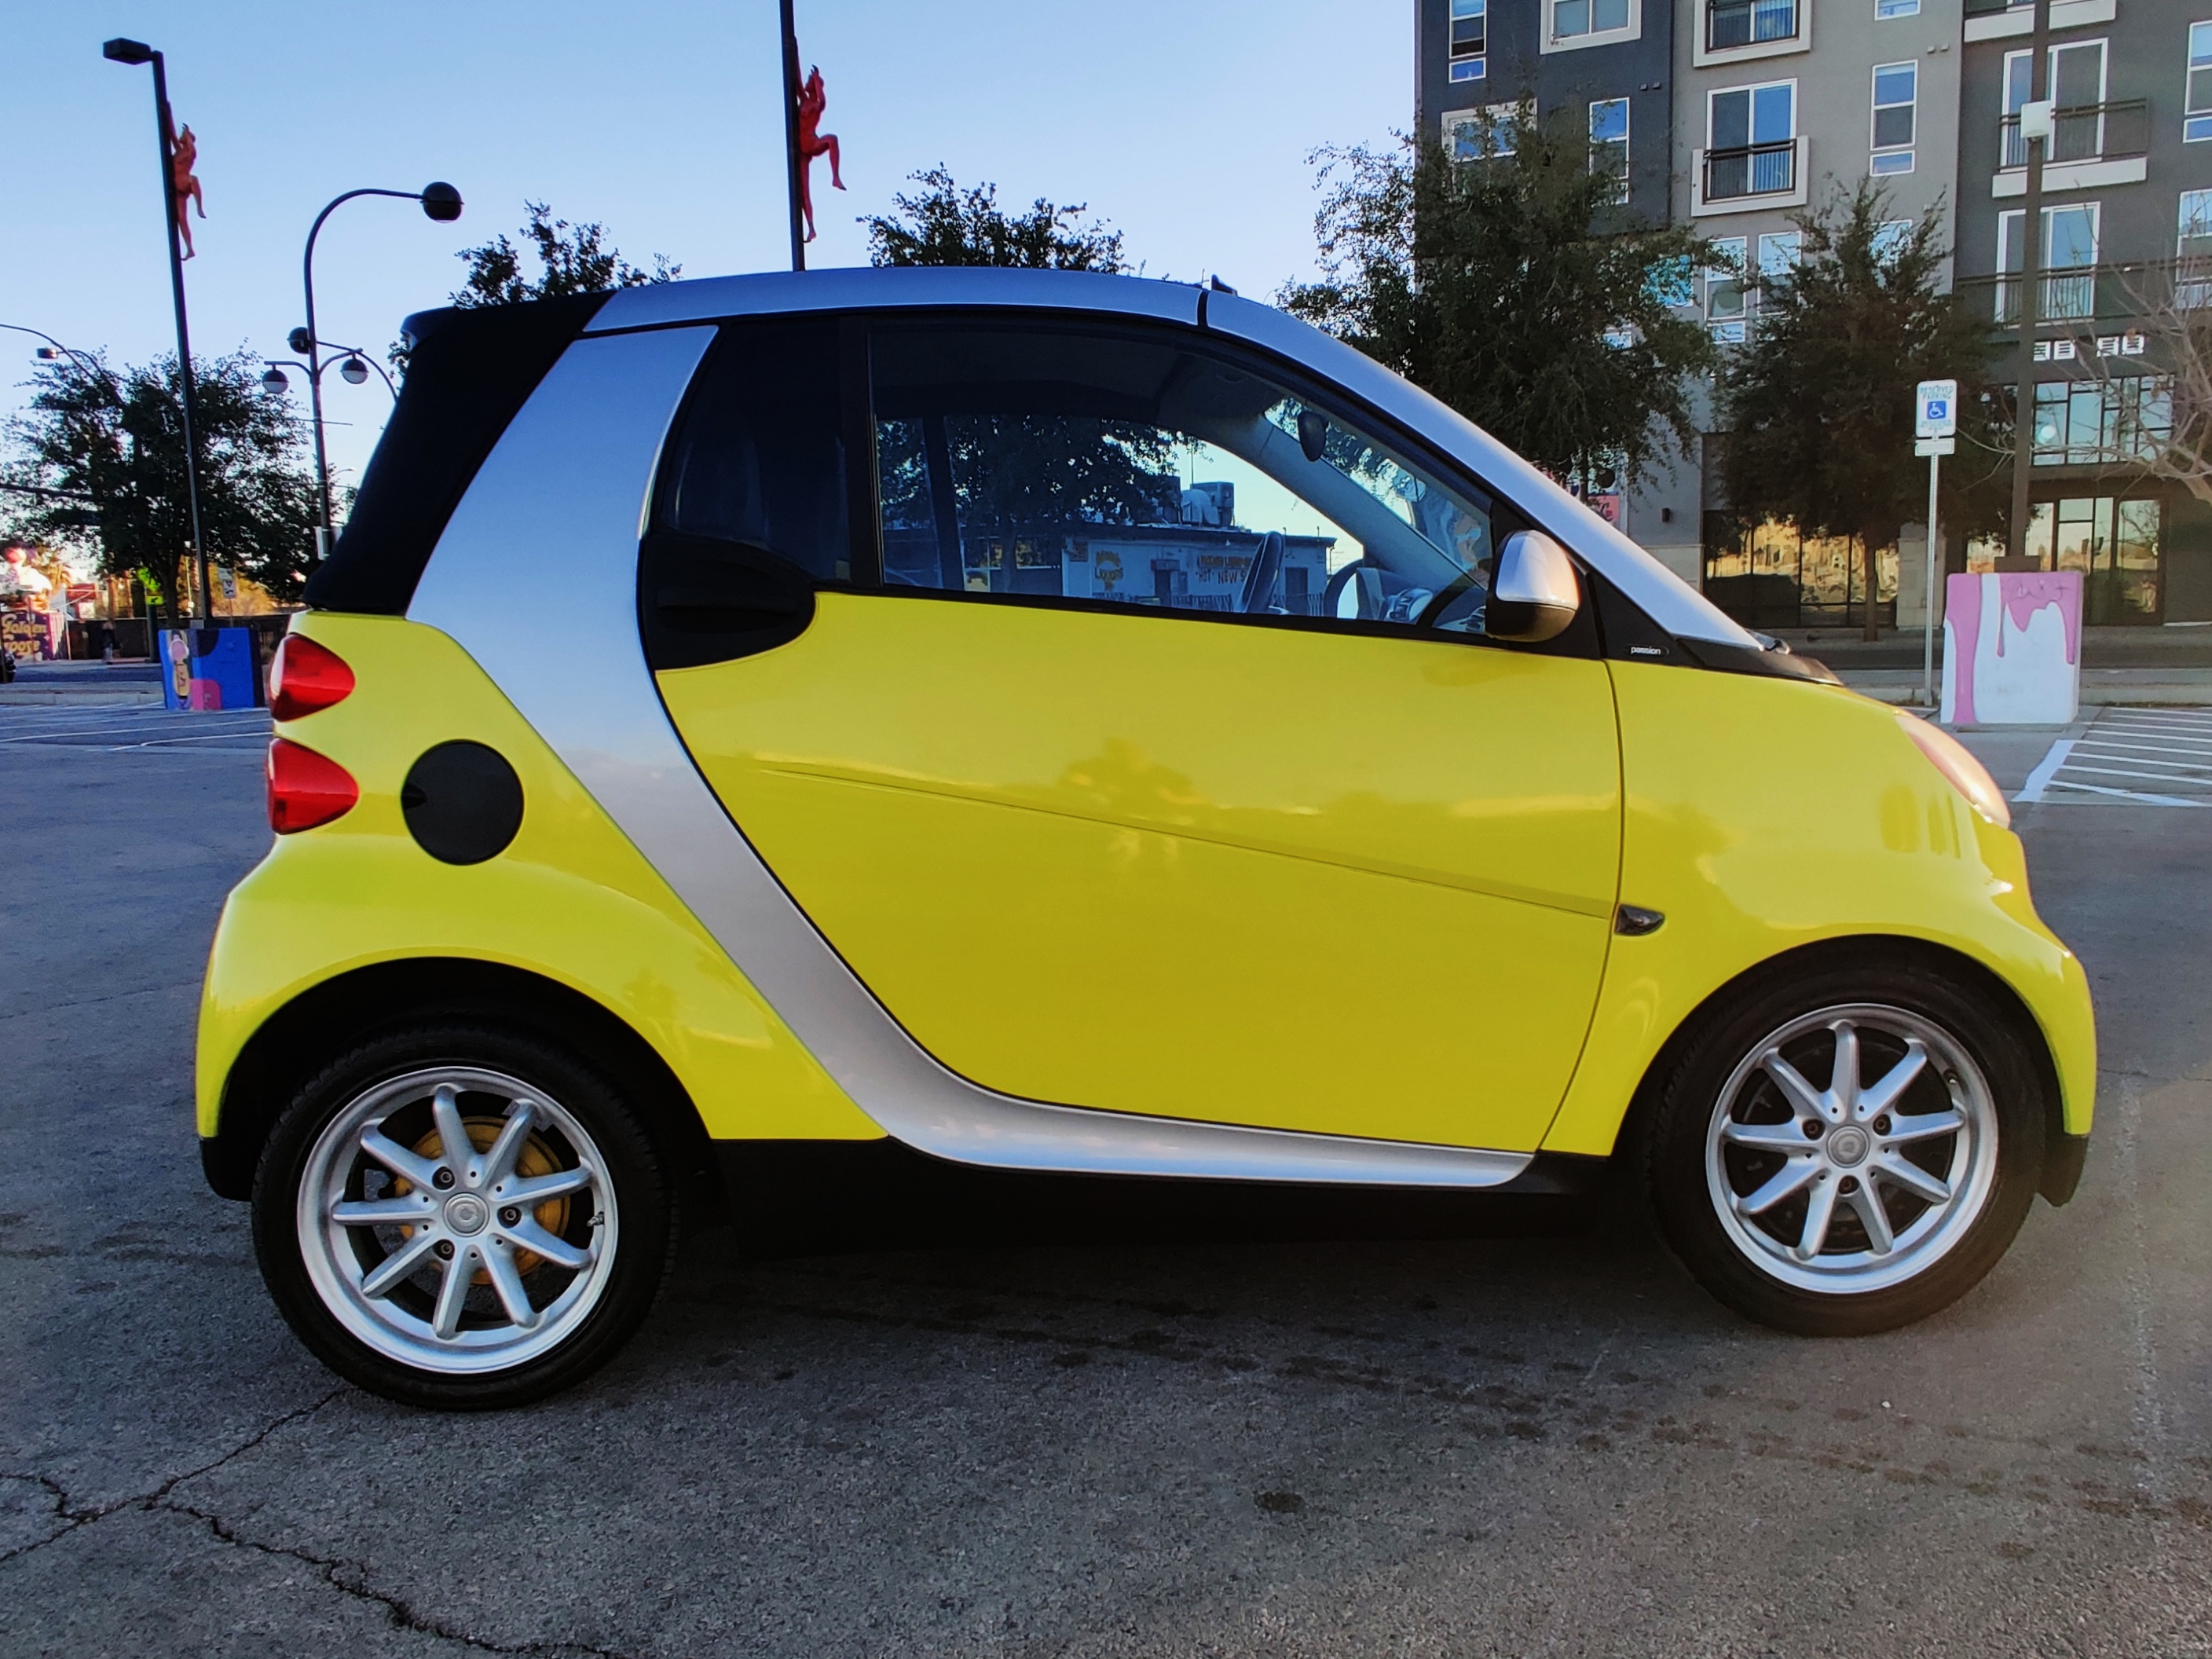 Used smart Cars for Sale Right Now - Autotrader